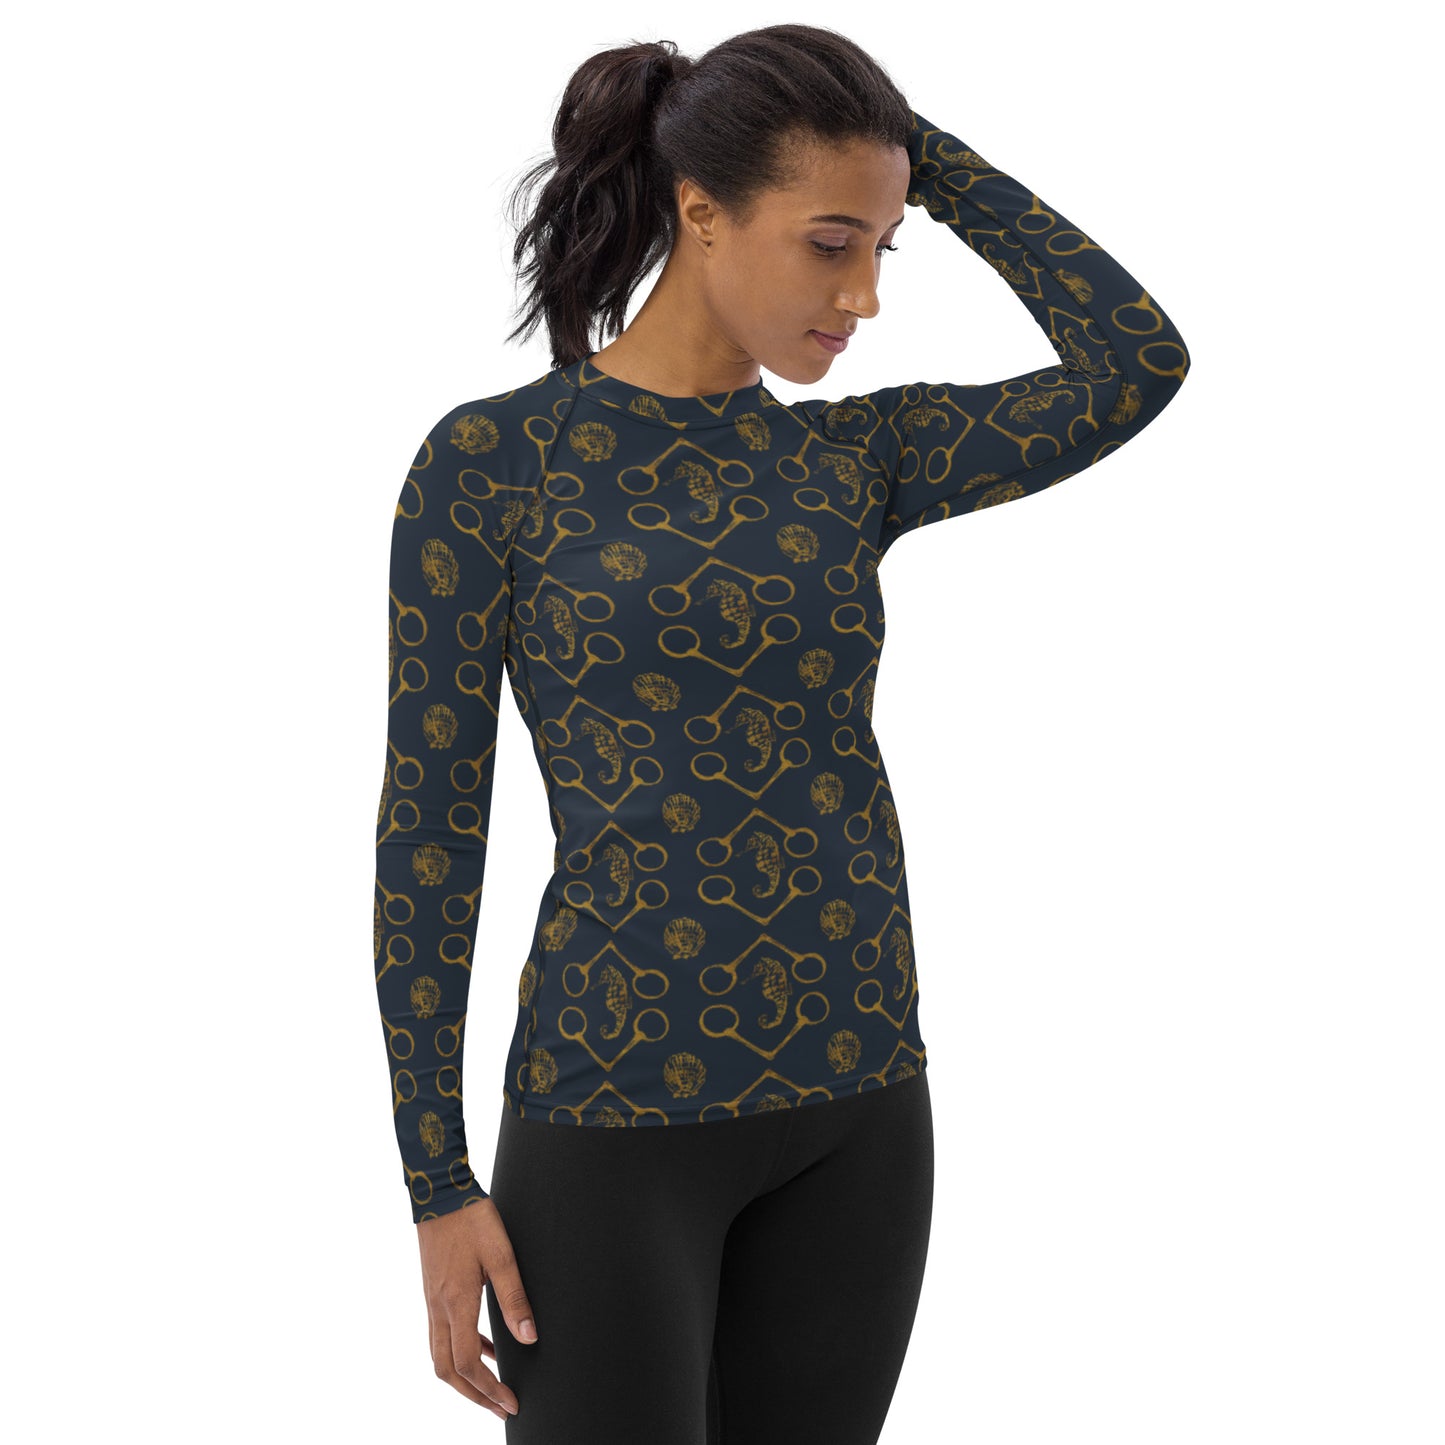 Sea Horse and bits - Navy and Gold -Women's Rash Guard